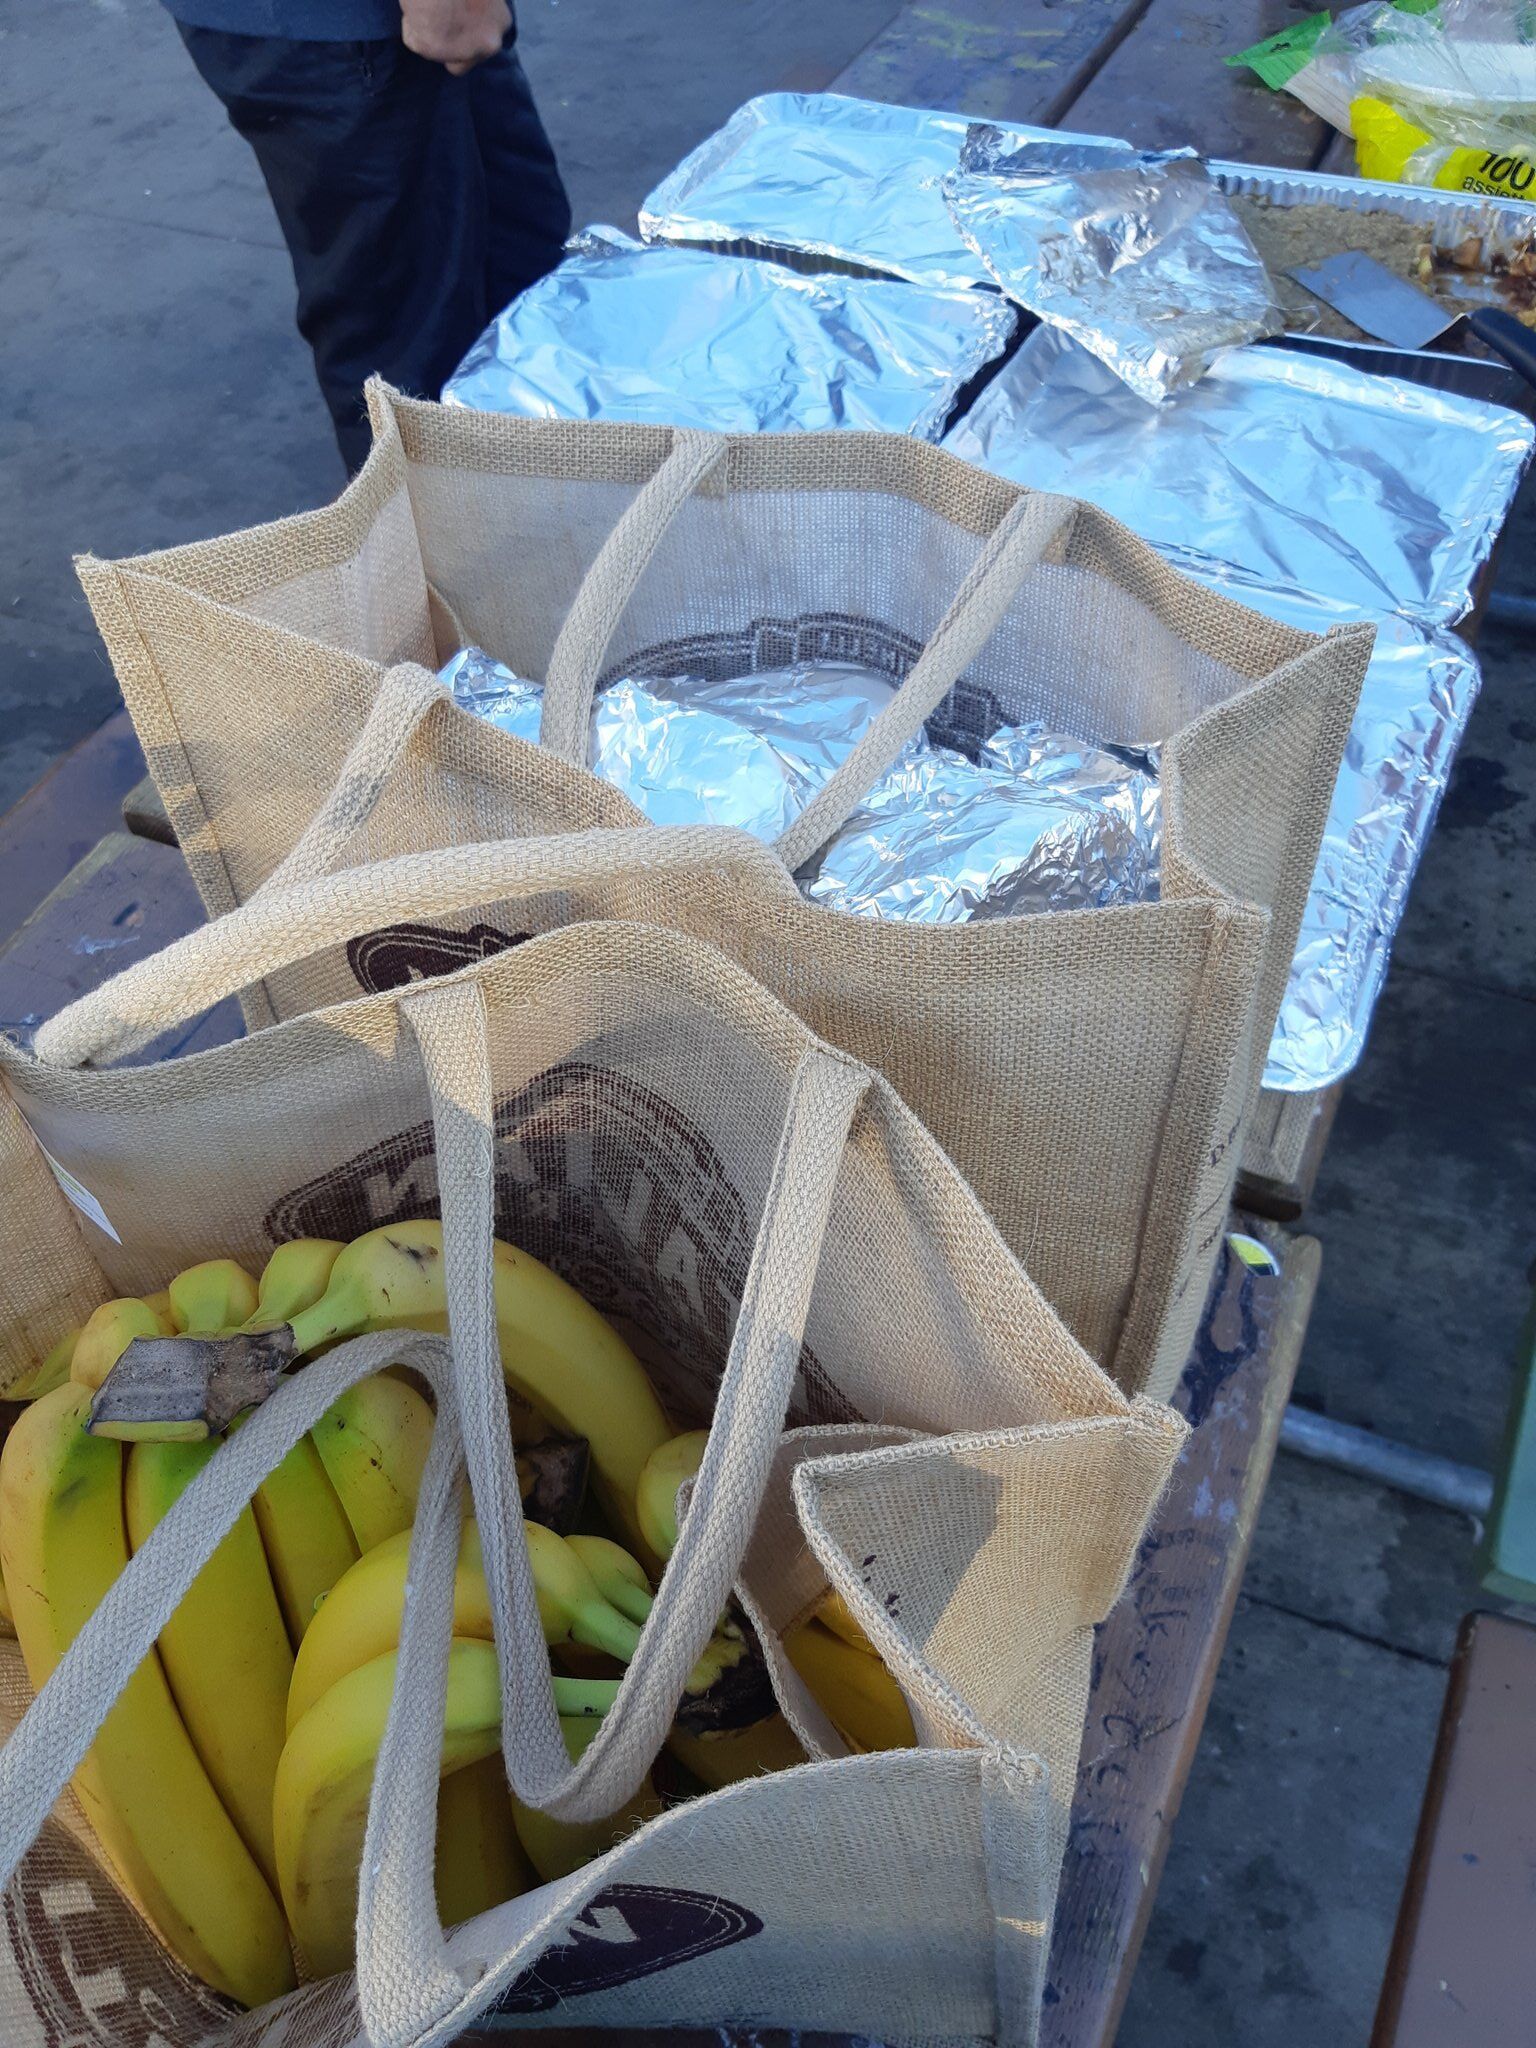 An image of the food to be served - canvas bags, one filled with bananas and another filled with foil-wrapped food in the foreground. Large foil dishes wrapped with food a bit further away from the camera. Paper plates and serving utensils. All piled on top of a picnic table.